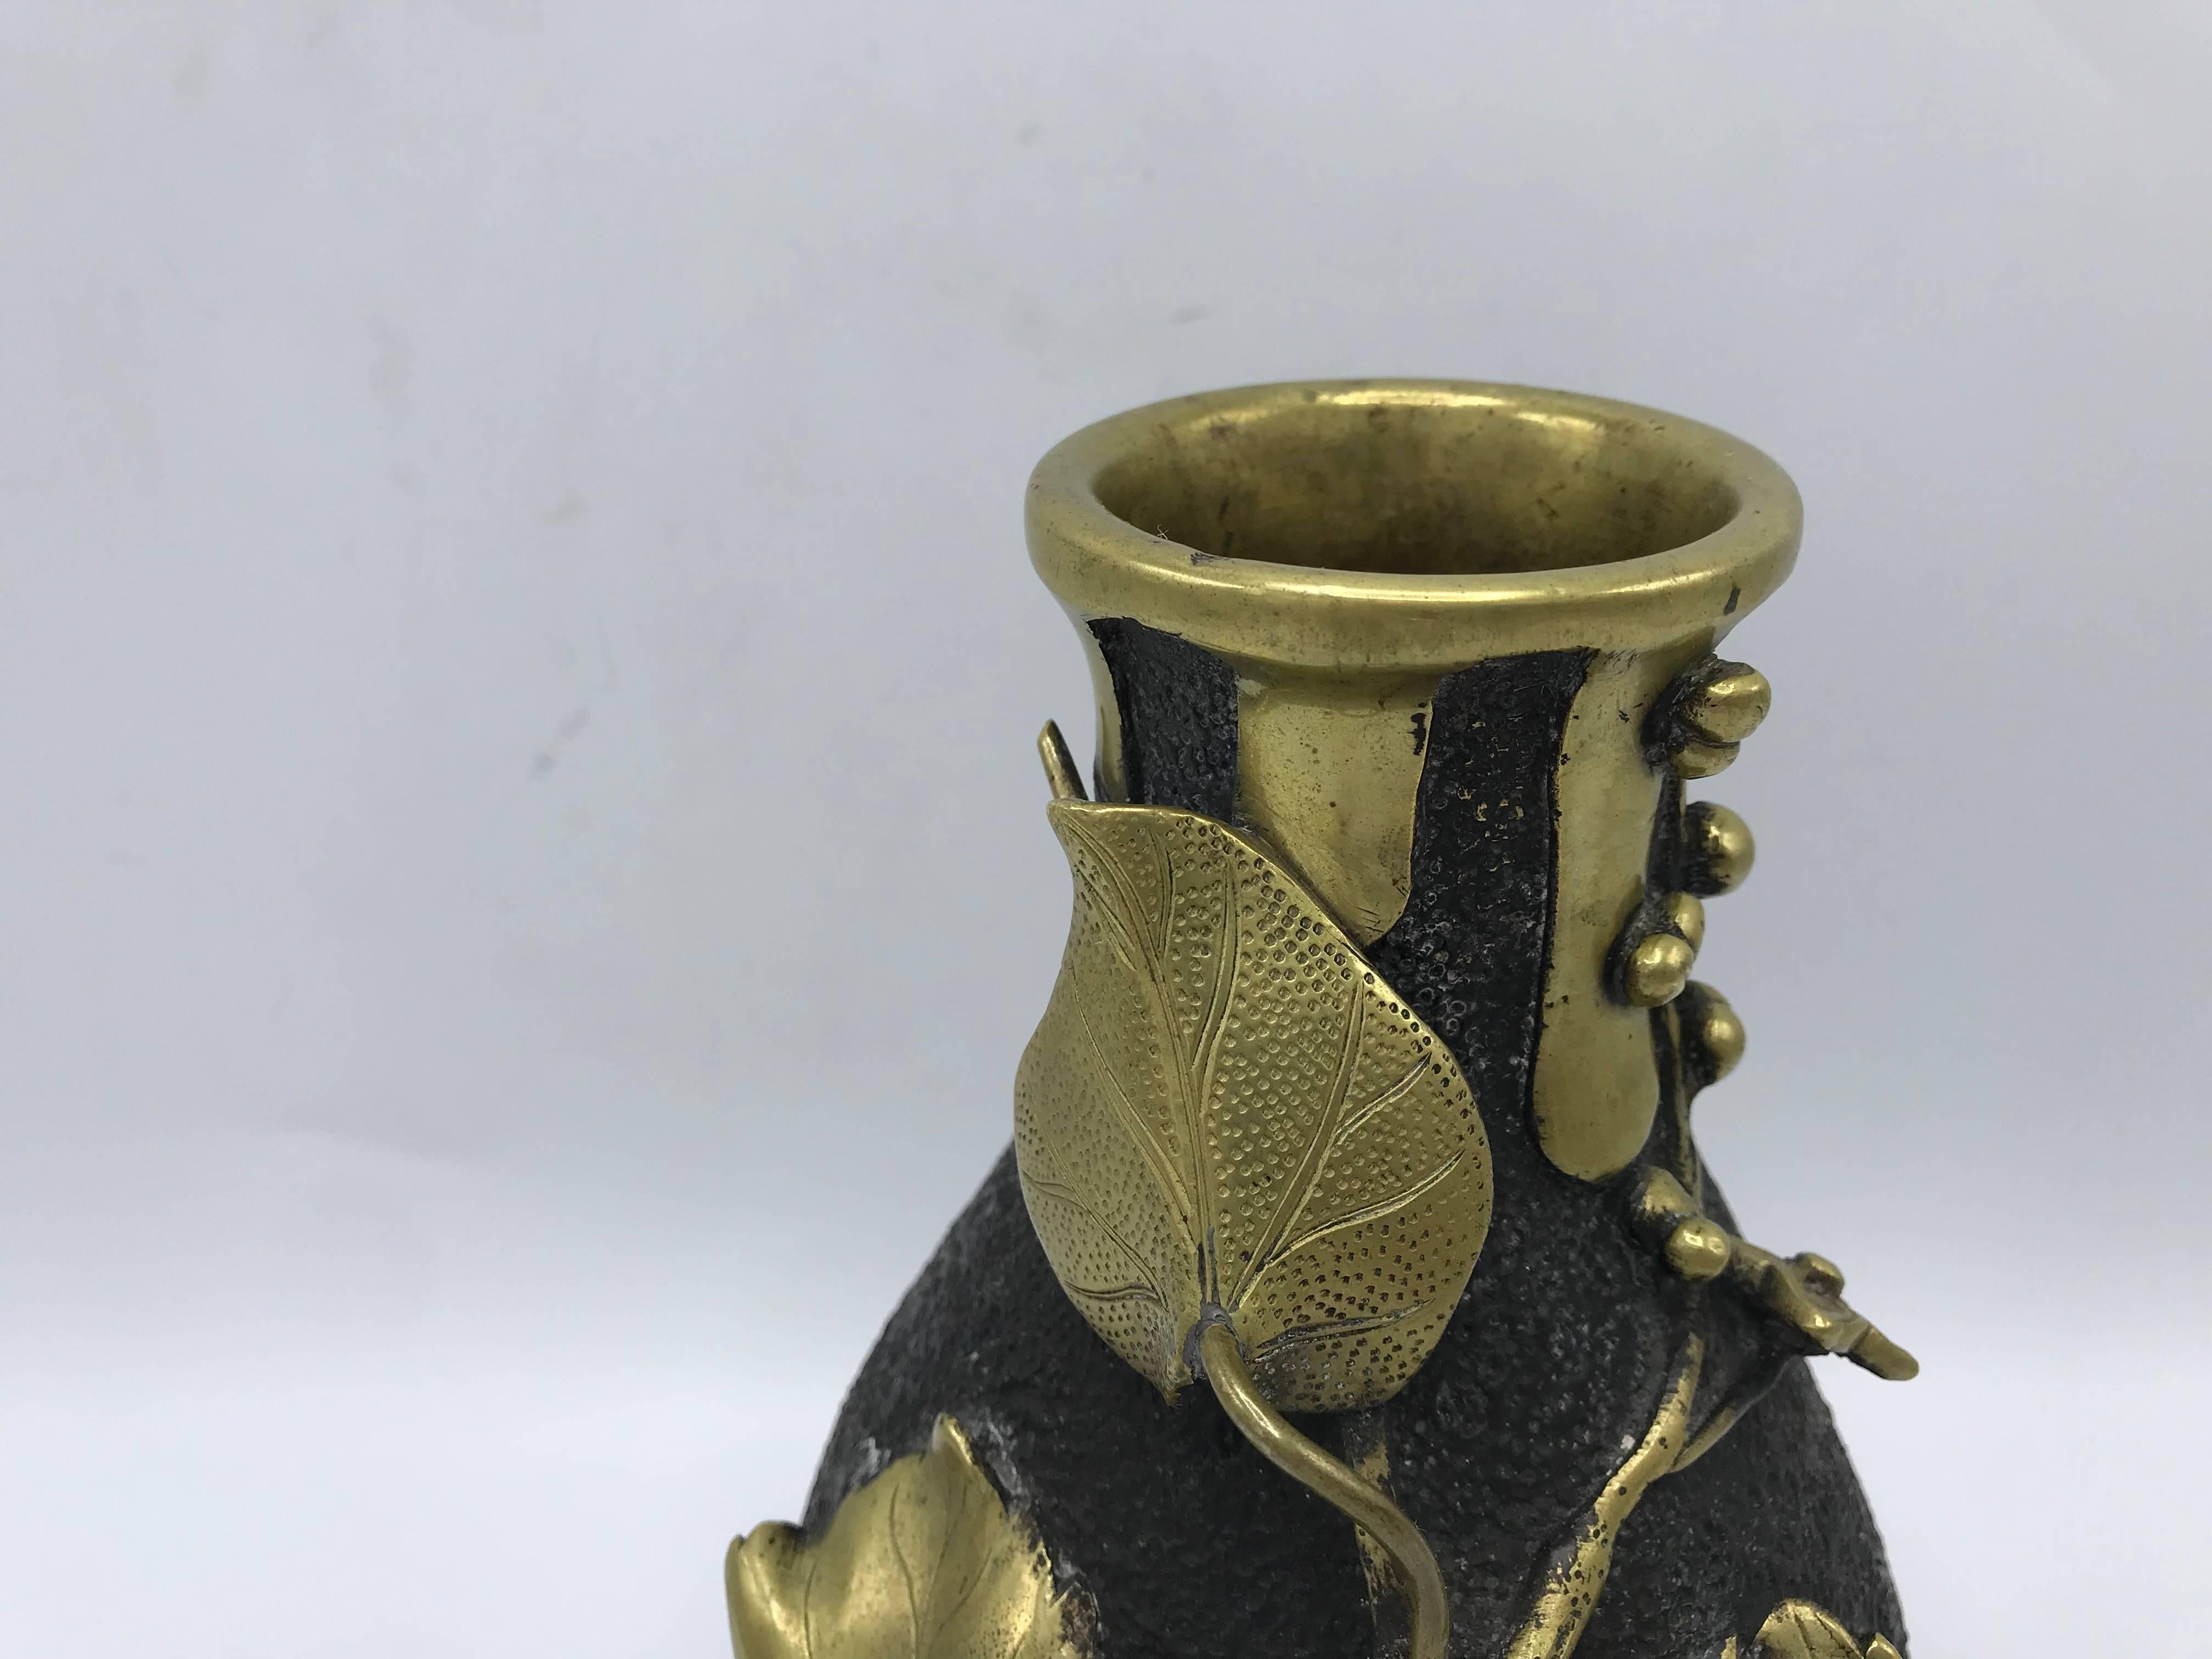 Offered is an immaculate, 19th century, French vase. The piece is solid bronze, with an organic trailing of sculptural gilded leaves and berries. Opening is 2.25" wide. Heavy.